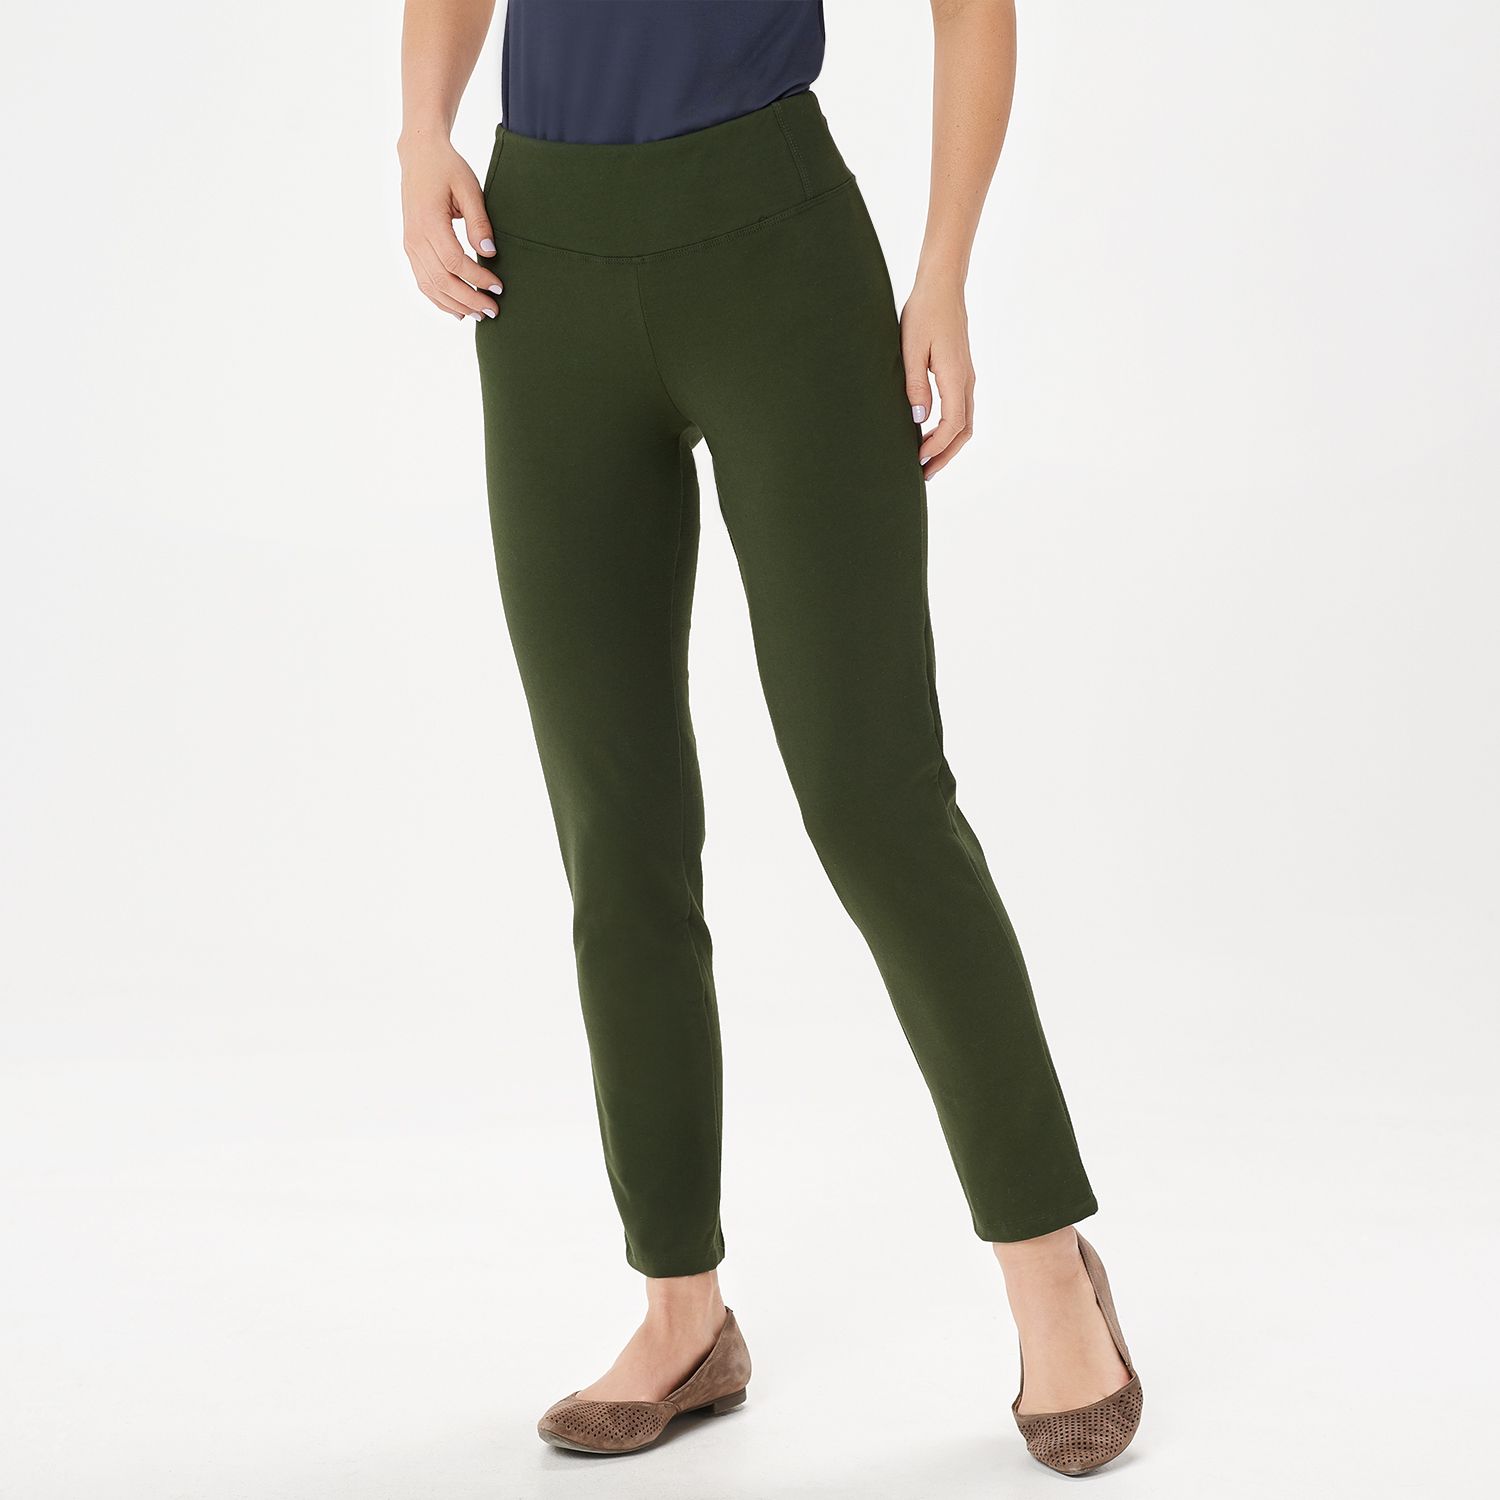 Women with Control Olive Green Tall Slim Leg Ankle Pants w/ Waist Seams New